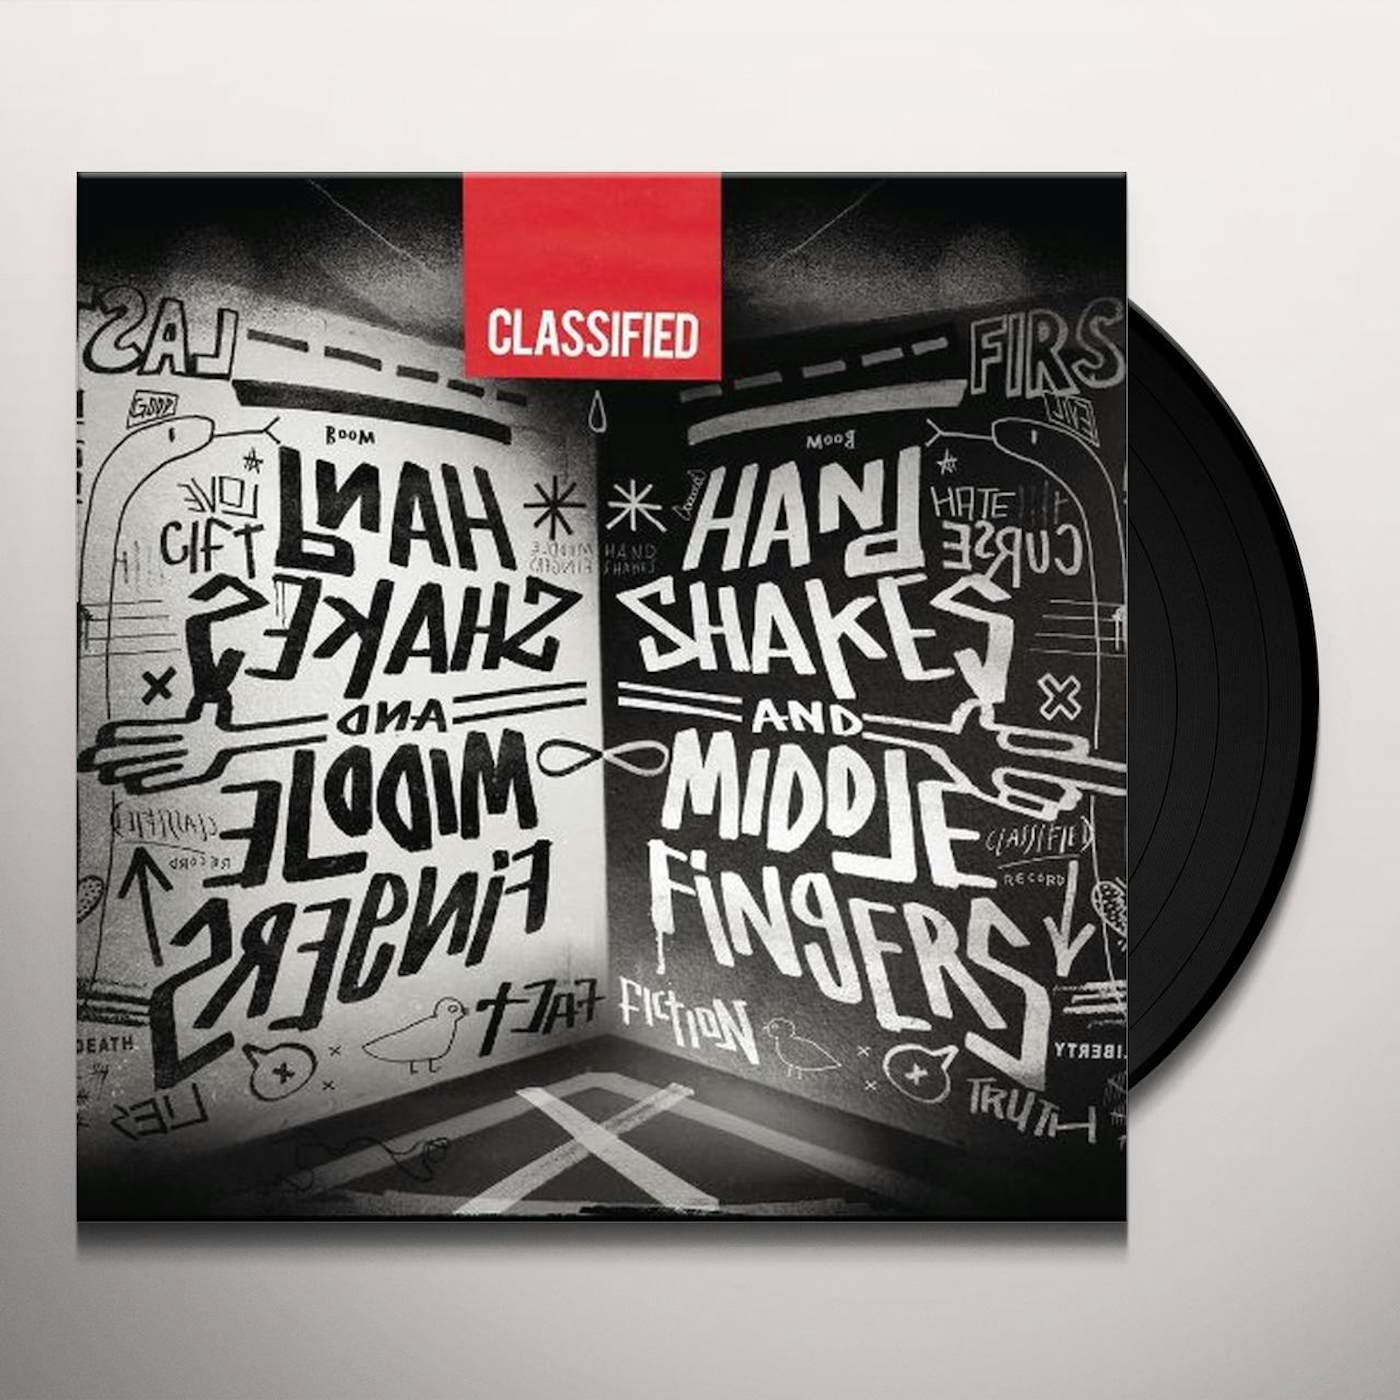 Classified HAND SHAKES & MIDDLE FINGERS (CAN) (Vinyl)